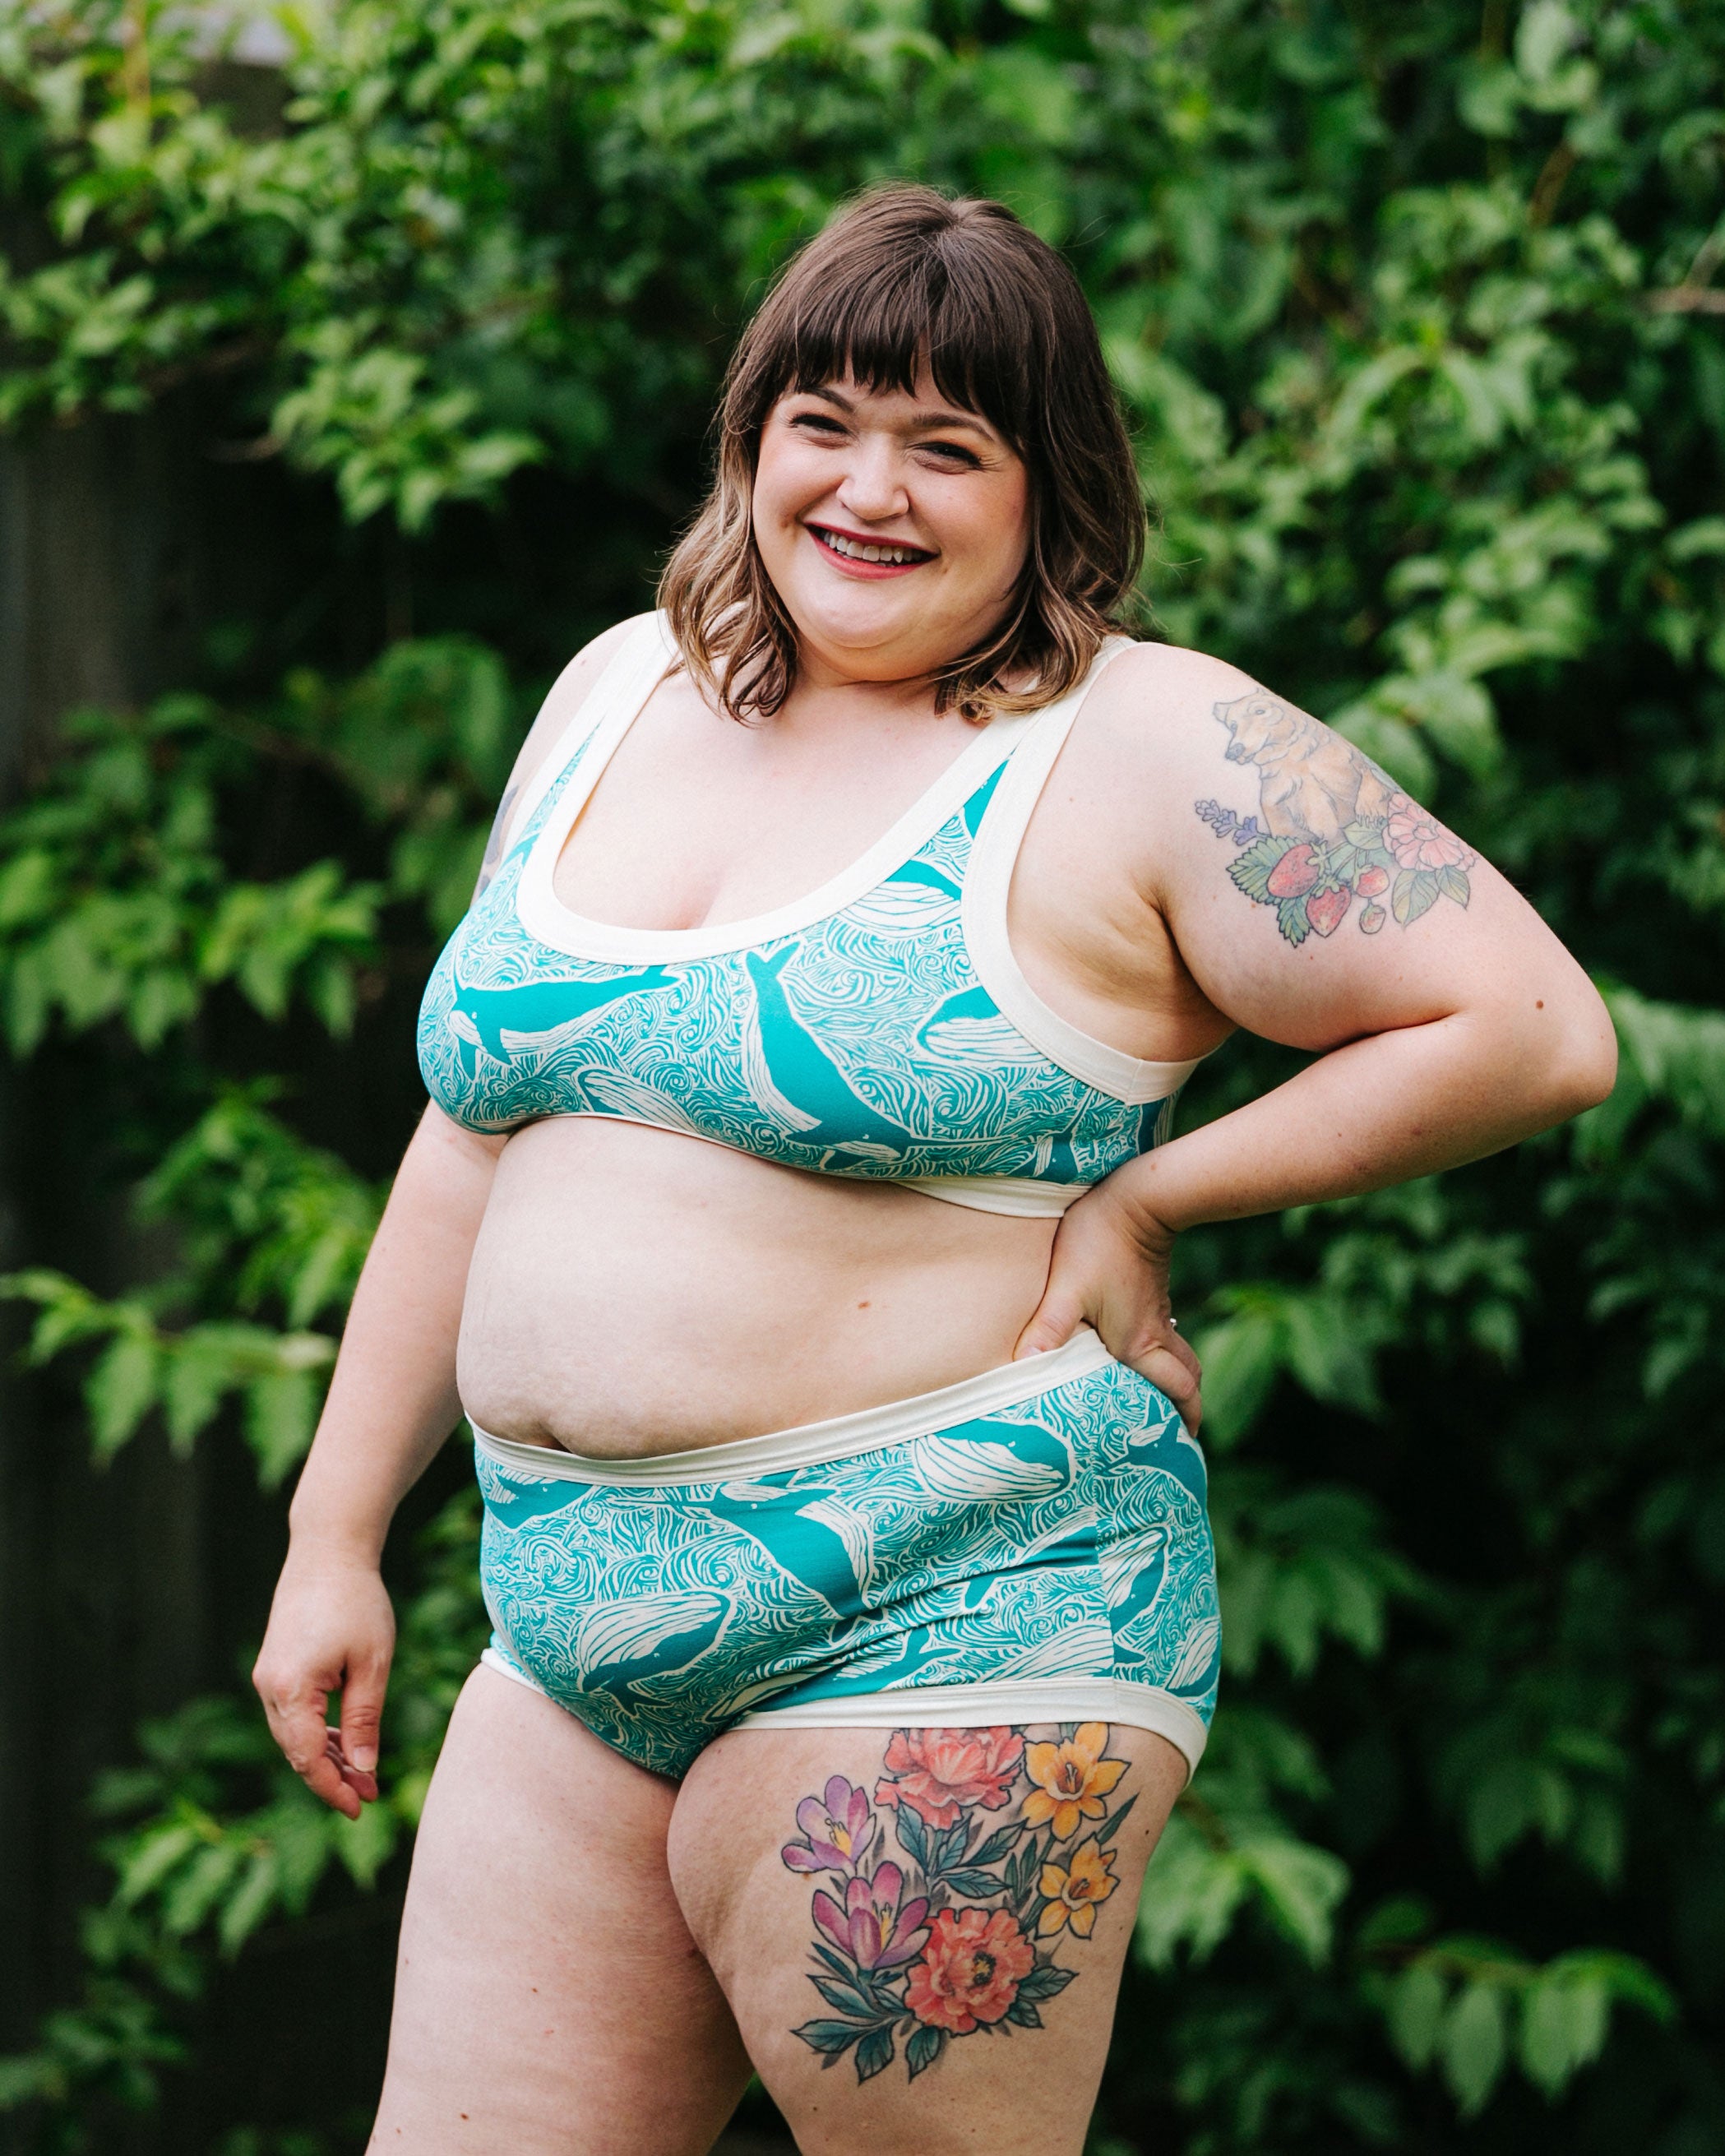 Model standing outside smiling wearing Thunderpants Organic Cotton Bralette and Original style underwear in our Marine Whales print: Turquoise all-over whale and ocean print.